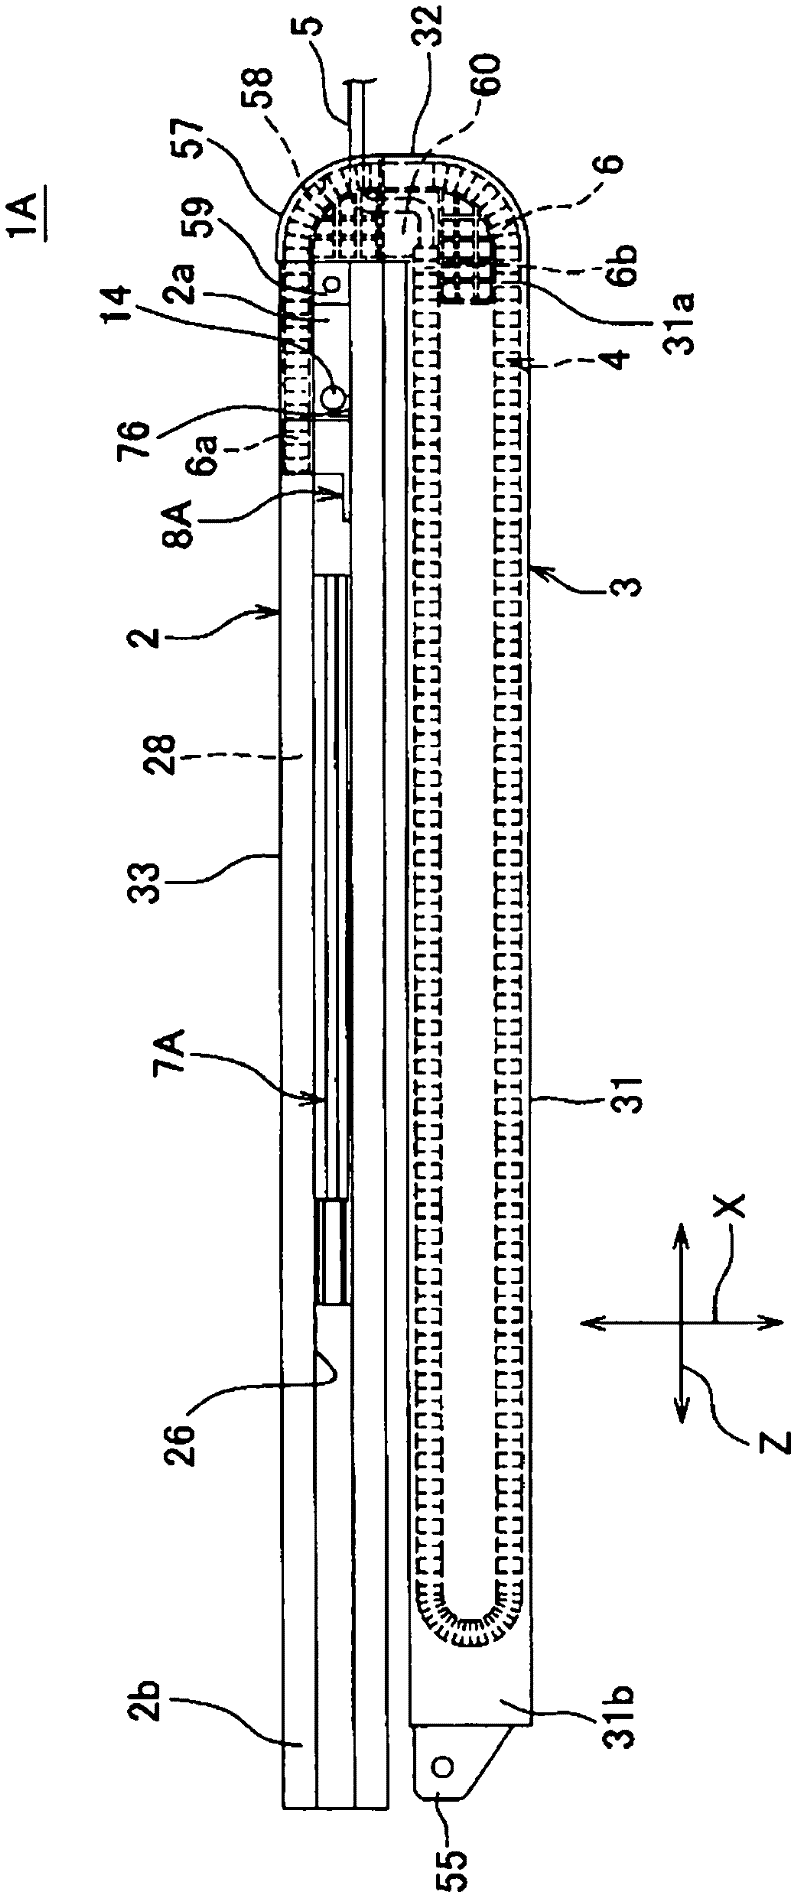 Wire harness ranging device